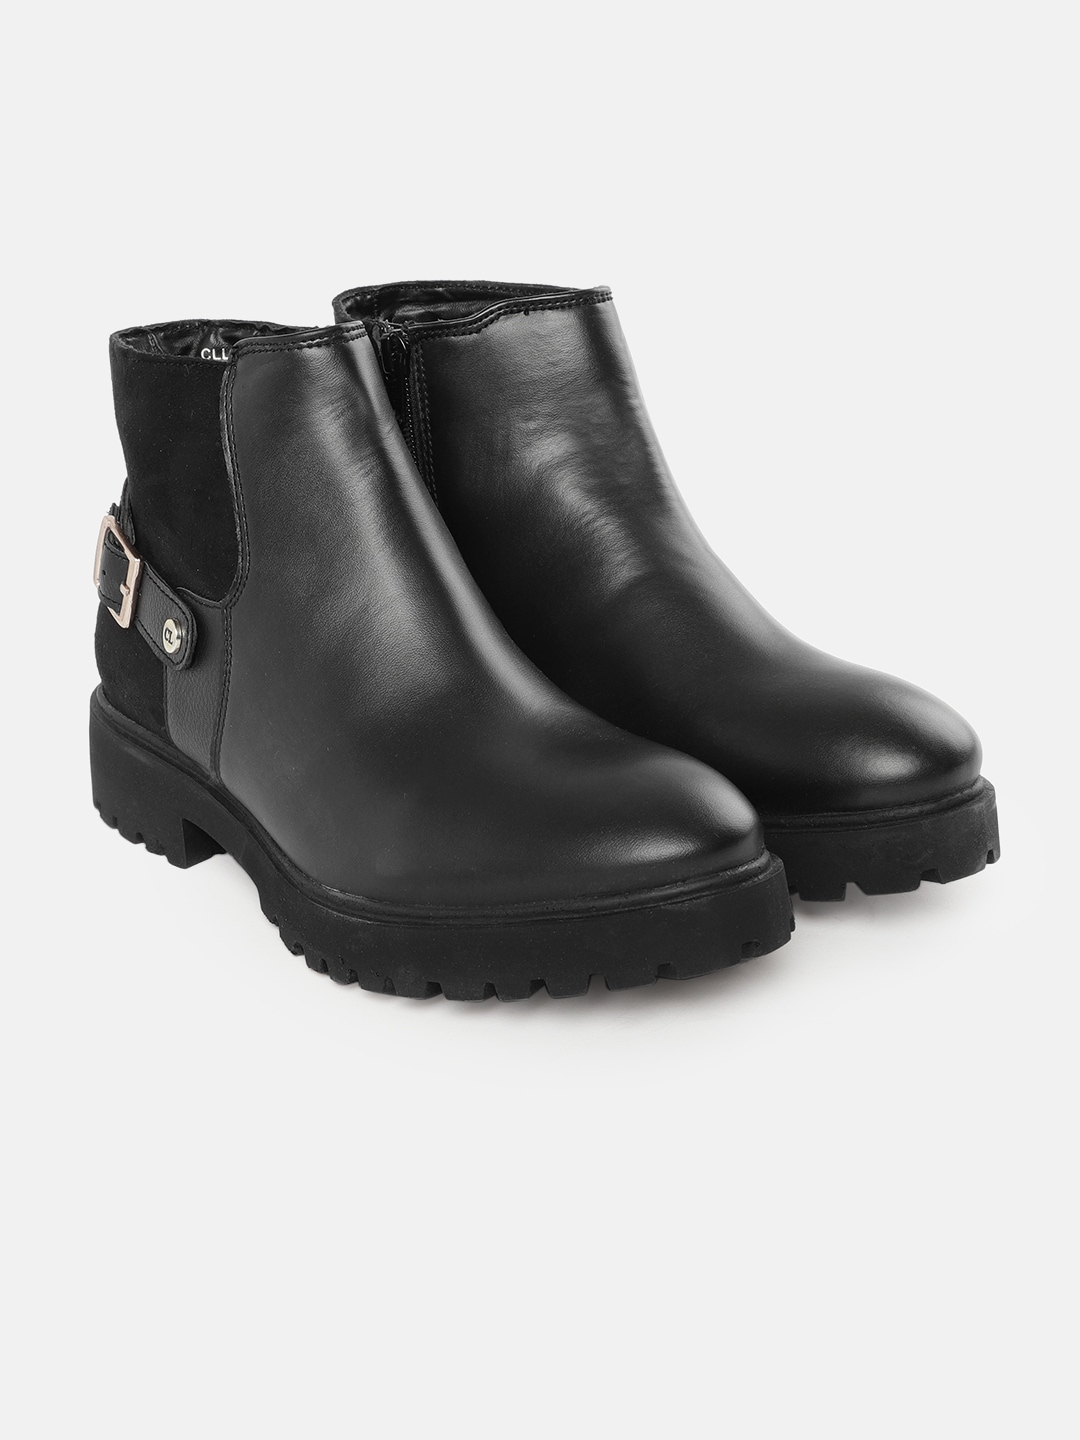 Carlton London Women Black Solid Flat Boots Price in India